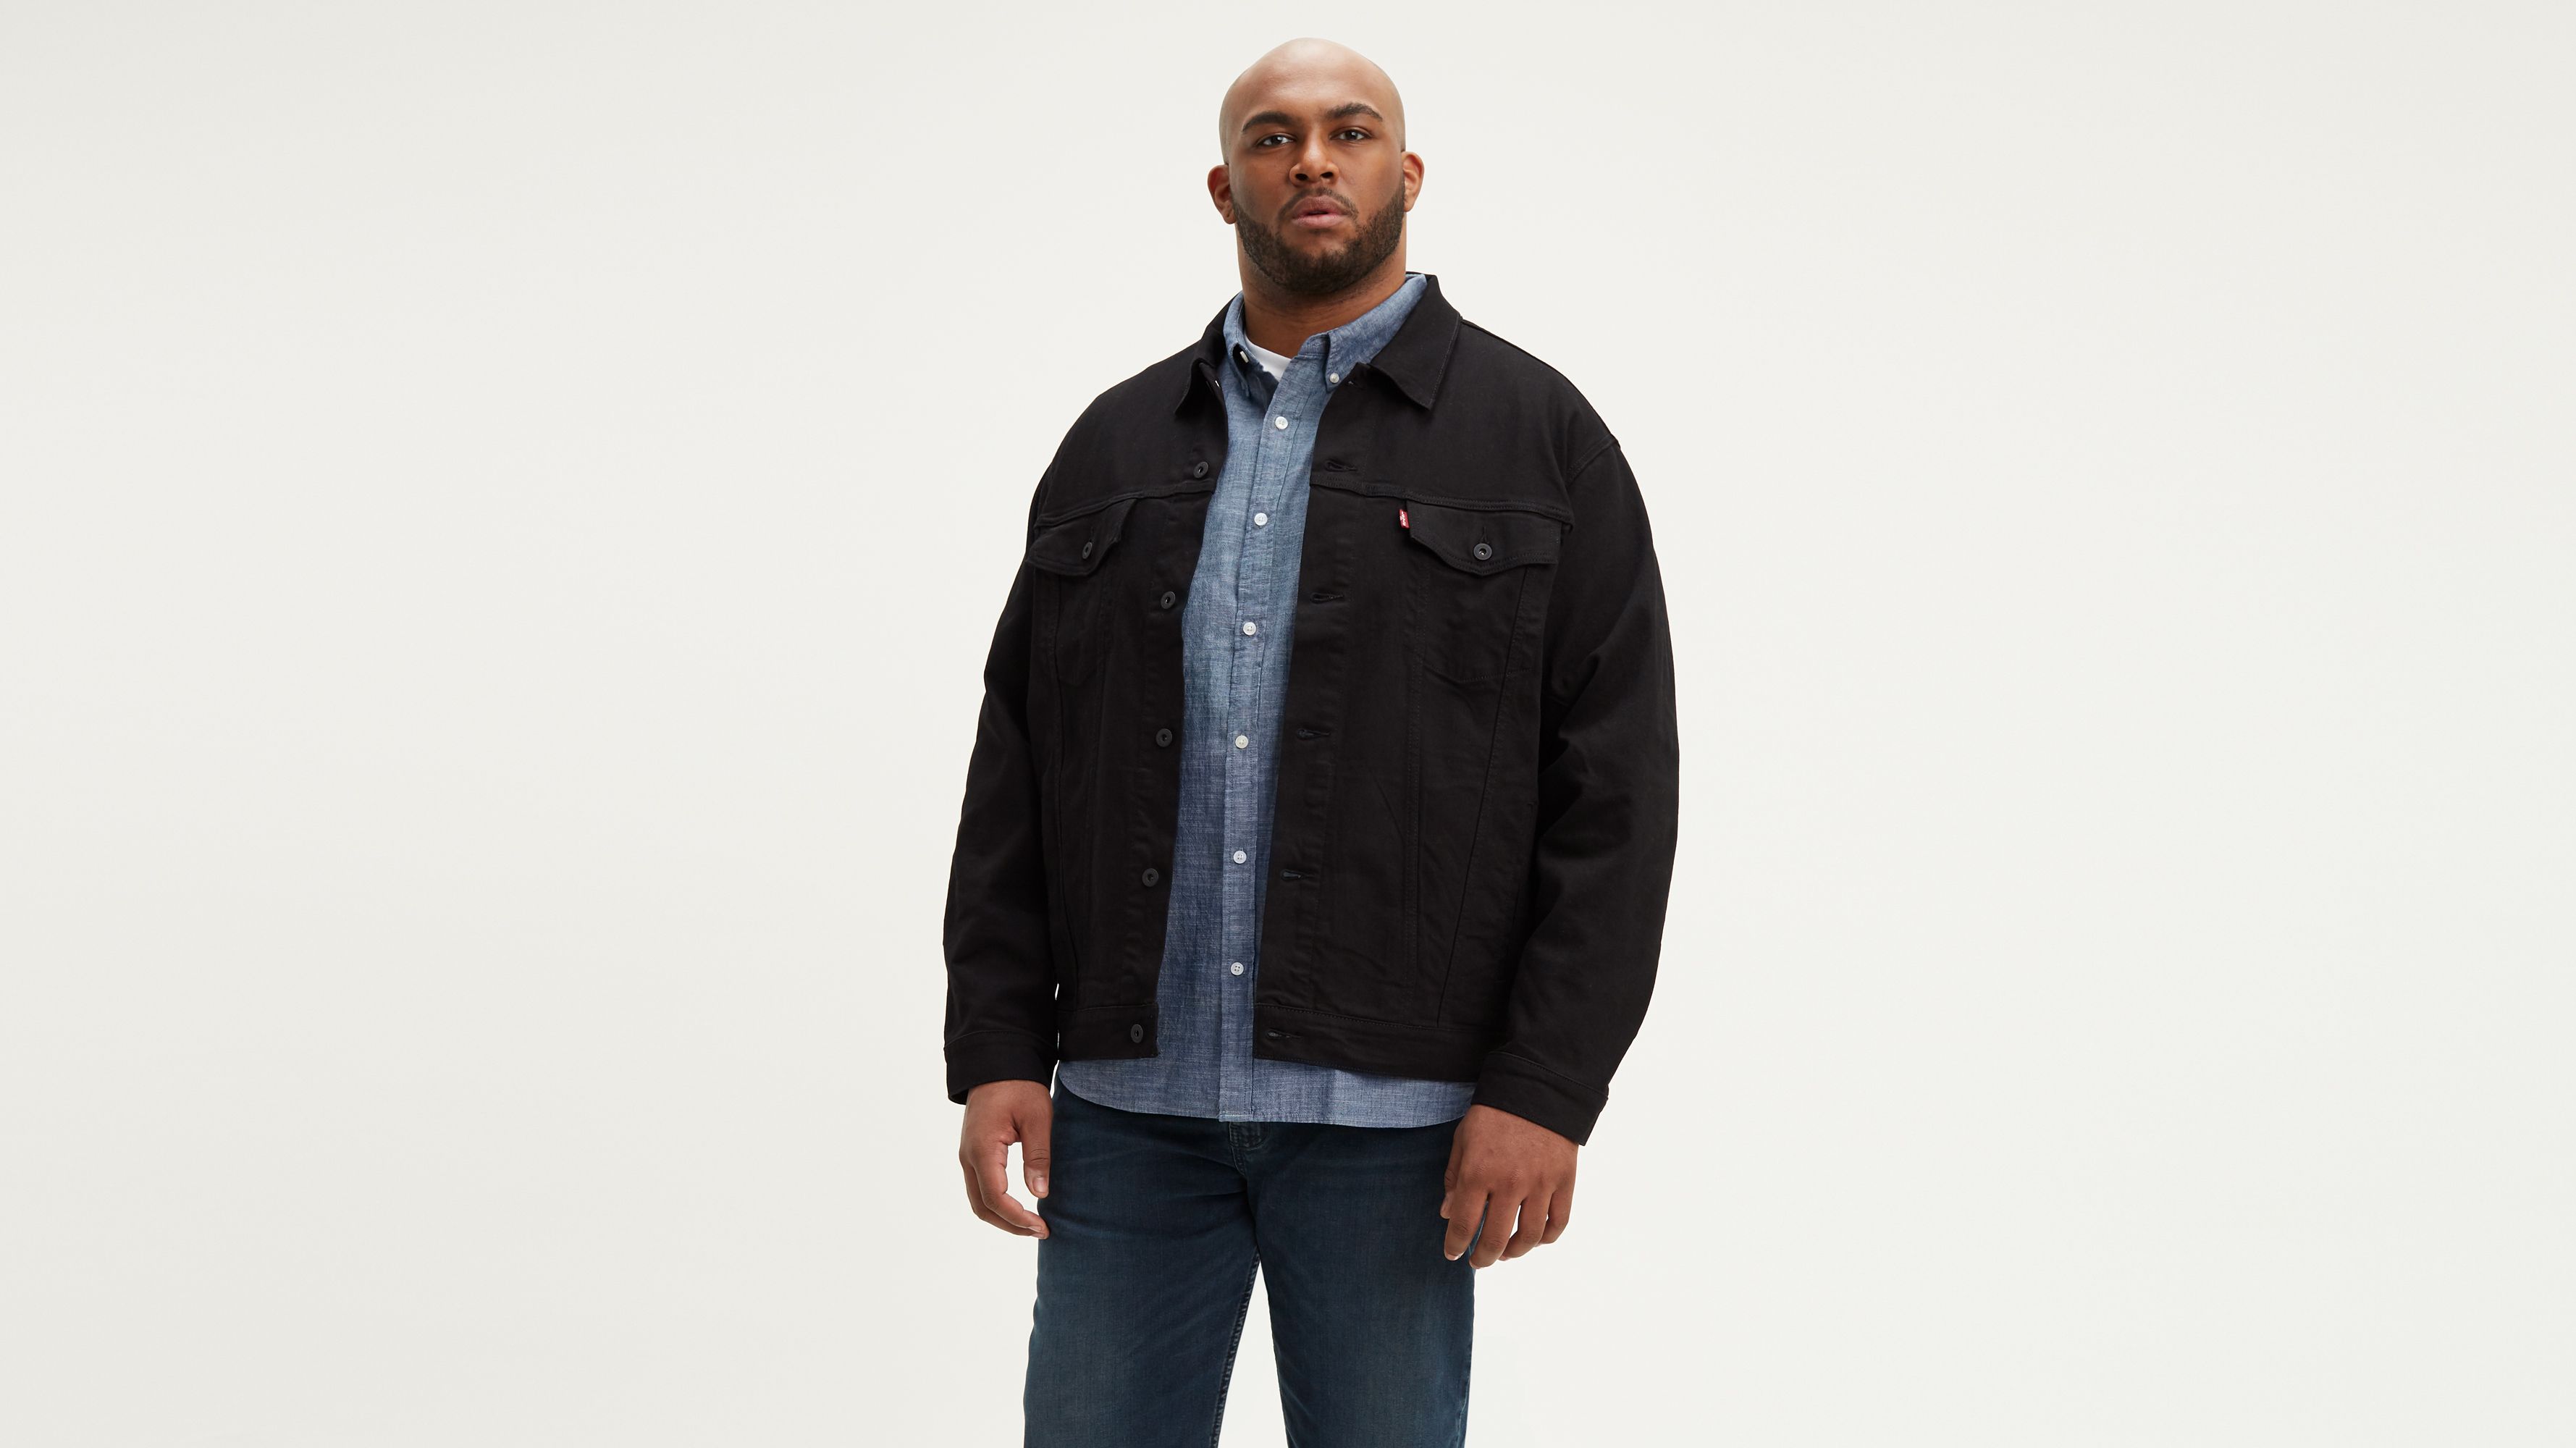 levi's big and tall jacket